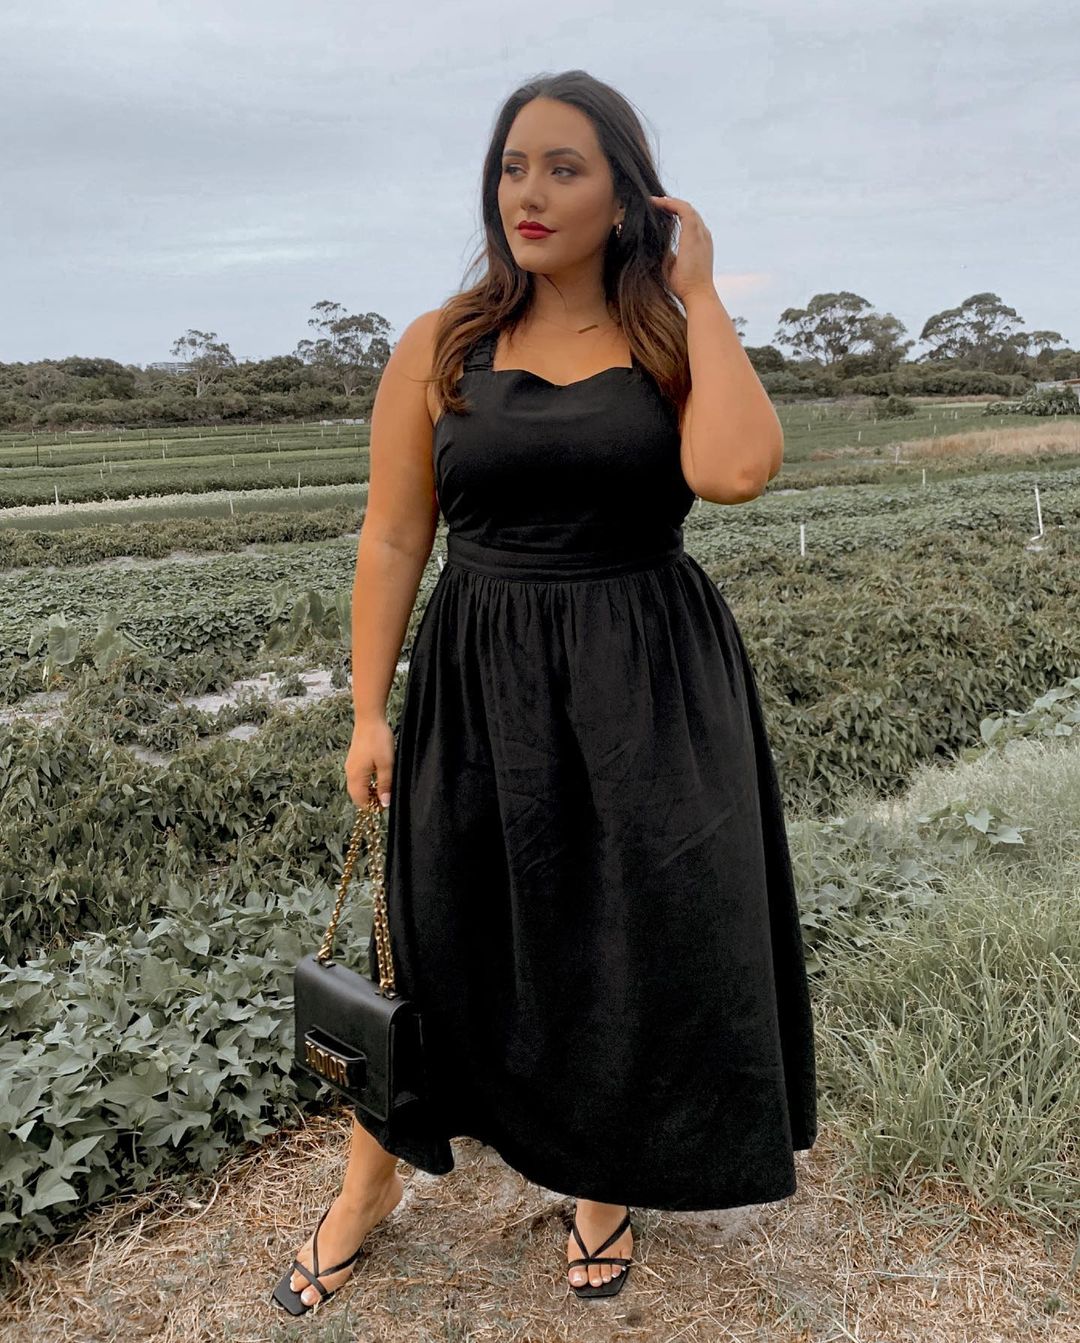 A 30-year-old Sydney plus-size model with a sweet look and a fleshy ...